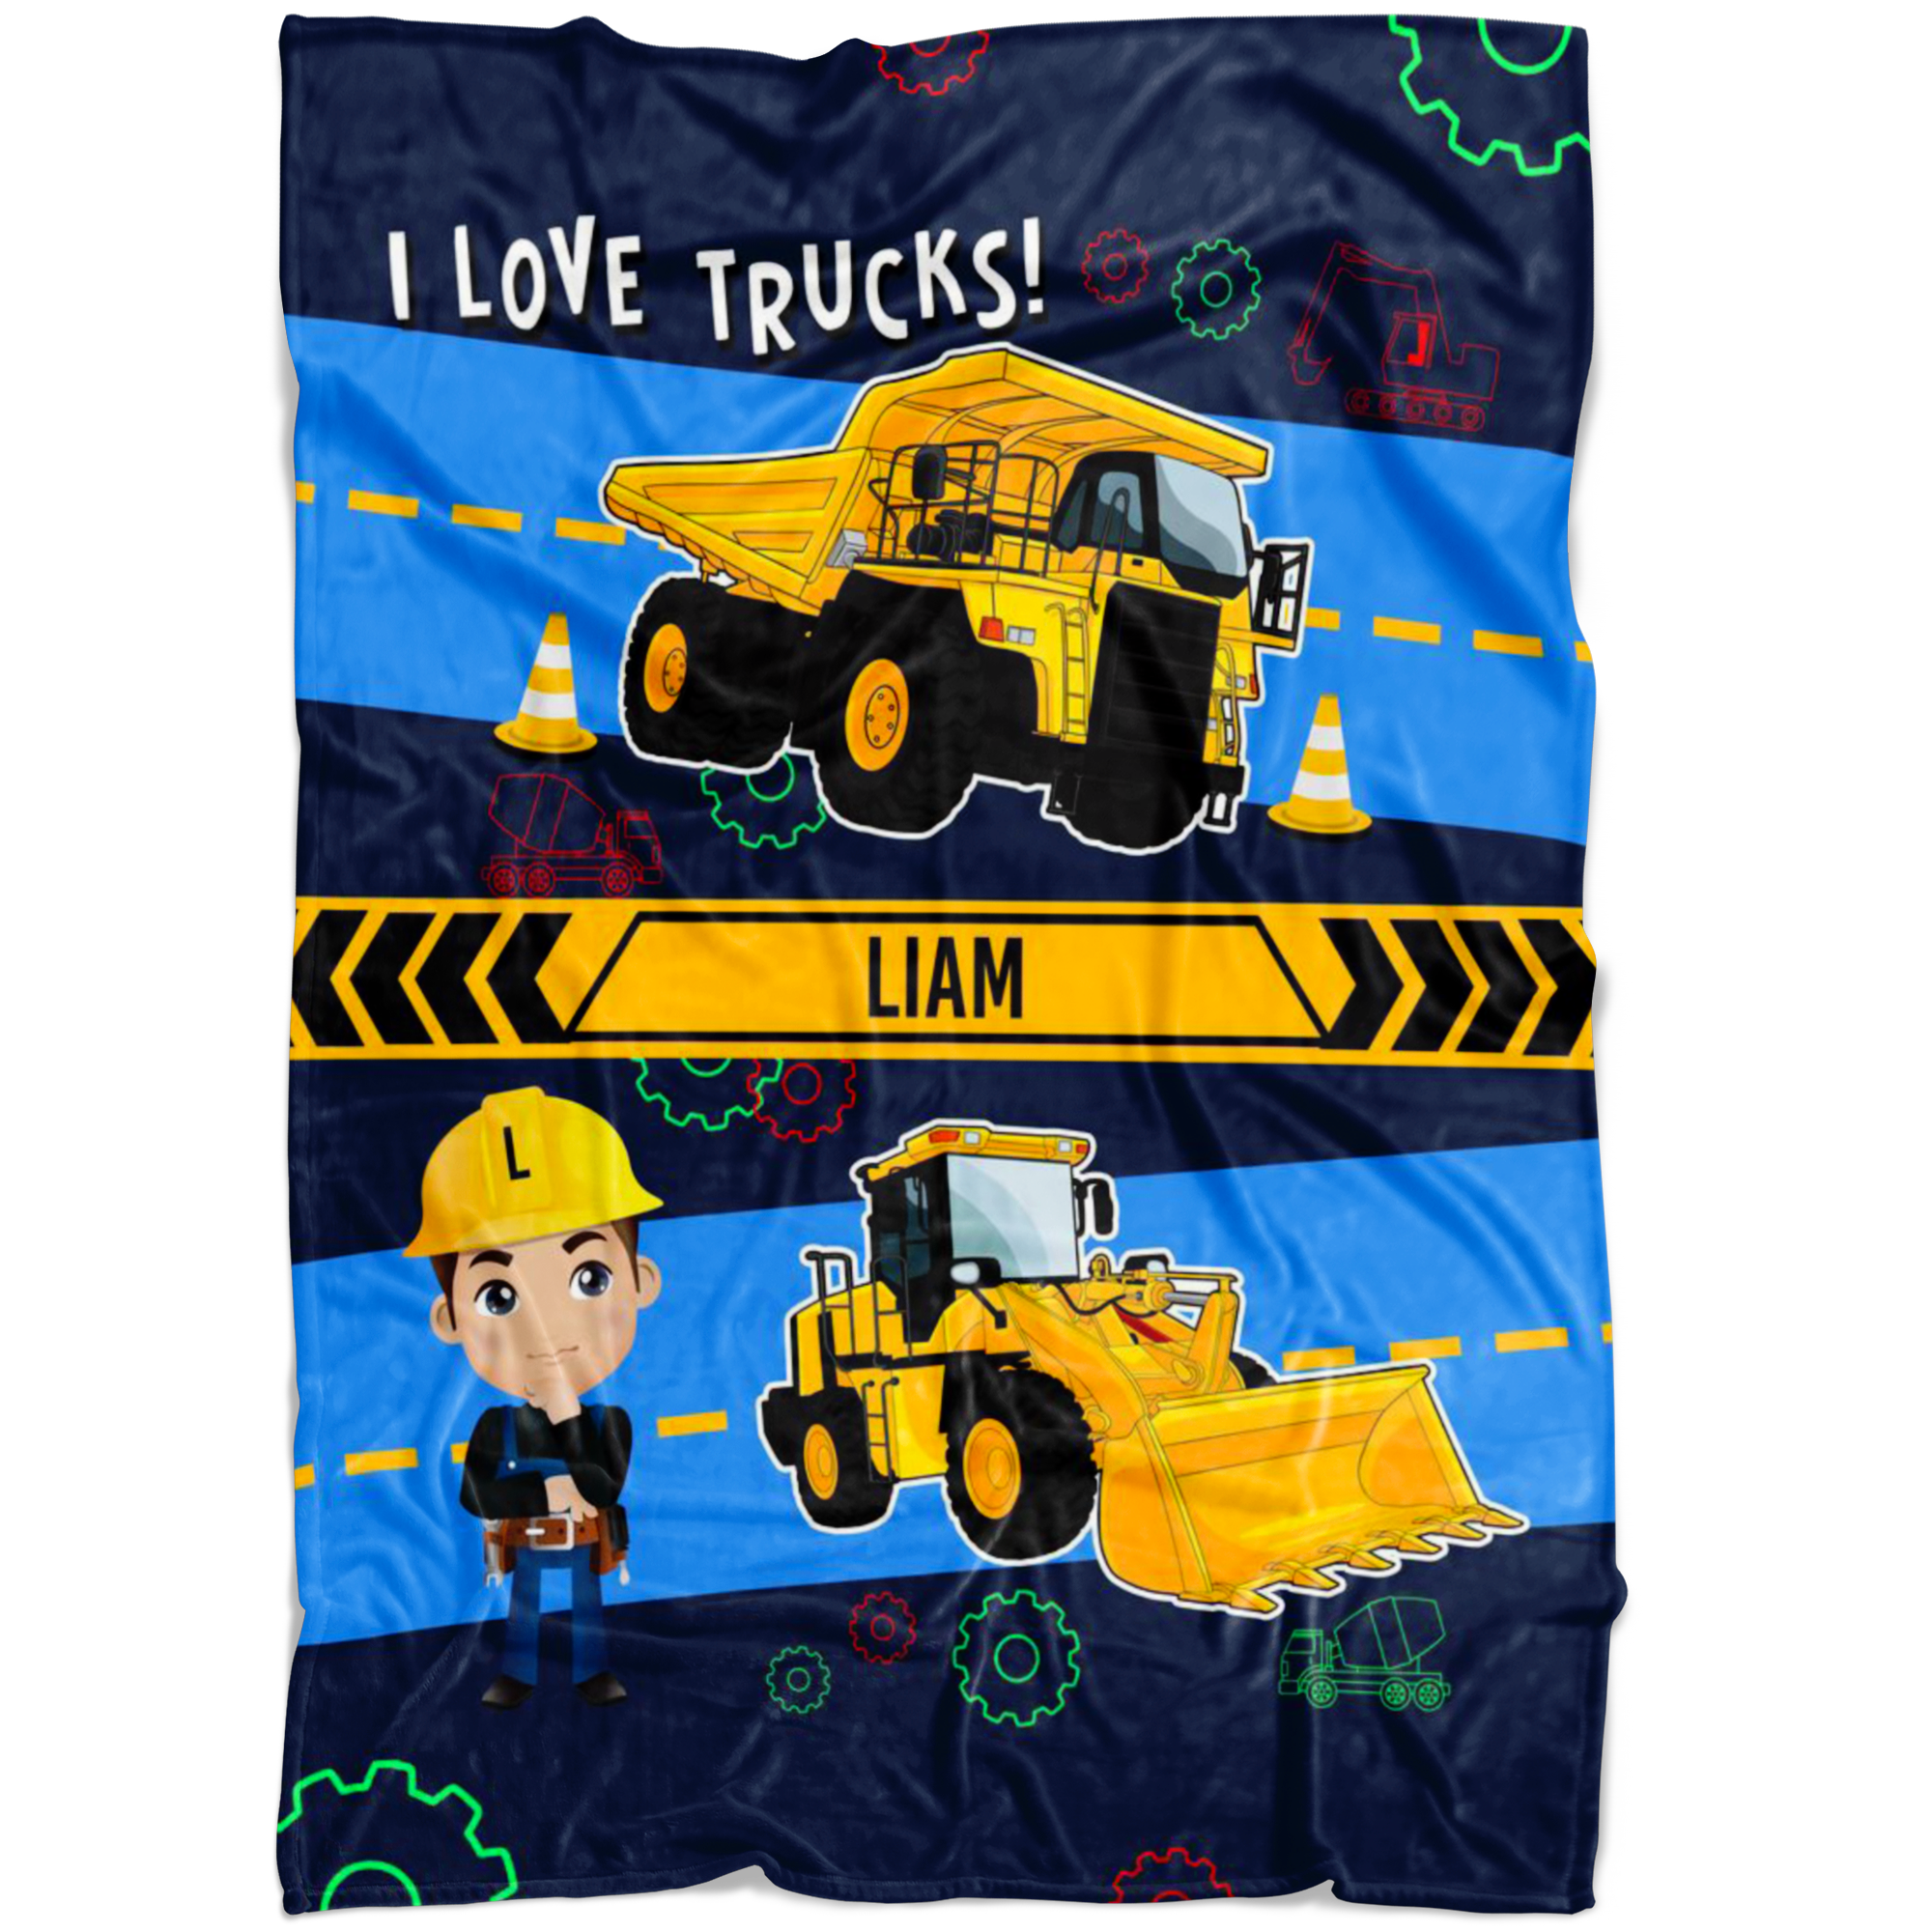 Personalized Name I Love Trucks Blanket for Boys & Girls with Character Personalization - Liam